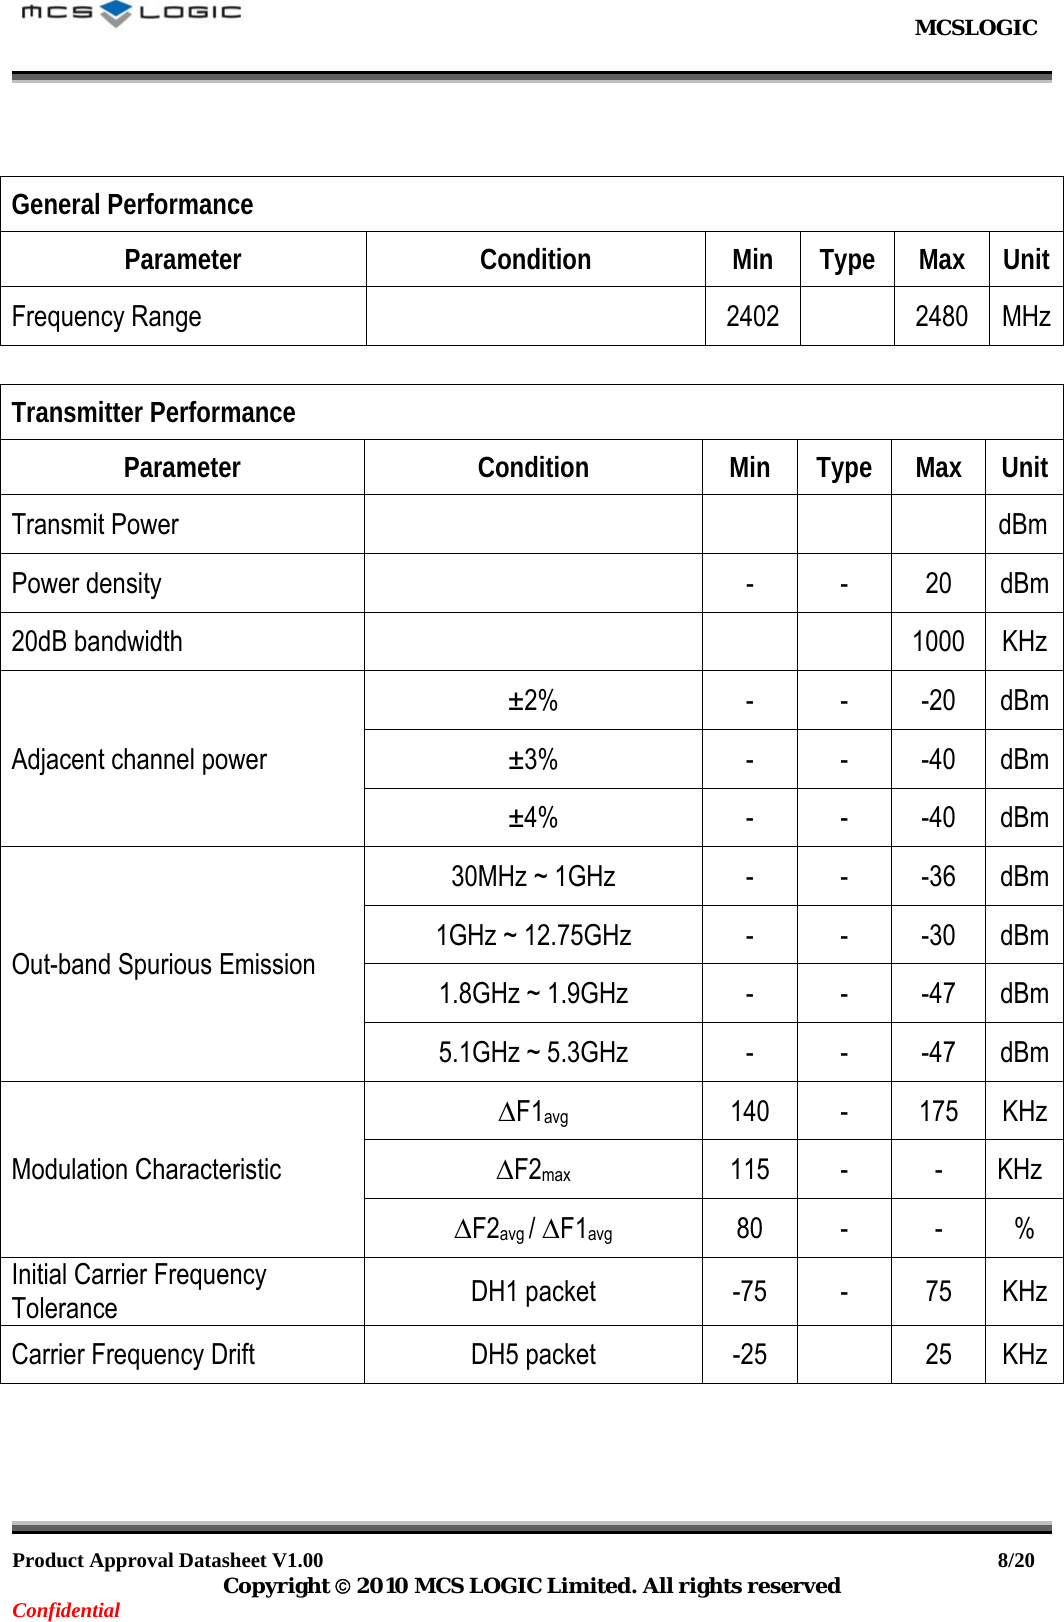                                                           MCSLOGIC                                                                                     Product Approval Datasheet V1.00                                                                  8/20 Copyright © 2010 MCS LOGIC Limited. All rights reserved Confidential    General Performance Parameter Condition Min Type Max Unit Frequency Range    2402  2480 MHz  Transmitter Performance Parameter Condition Min Type Max Unit Transmit Power                    dBm Power density    -  -  20  dBm 20dB bandwidth        1000  KHz Adjacent channel power ±2% - - -20 dBm ±3% - - -40 dBm ±4% - - -40 dBm Out-band Spurious Emission 30MHz ~ 1GHz  -  -  -36  dBm 1GHz ~ 12.75GHz  -  -  -30  dBm 1.8GHz ~ 1.9GHz  -  -  -47  dBm 5.1GHz ~ 5.3GHz  -  -  -47  dBm Modulation Characteristic ∆F1avg  140 - 175 KHz ∆F2max 115 - - KHz ∆F2avg / ∆F1avg 80 - - % Initial Carrier Frequency Tolerance  DH1 packet  -75  -  75  KHz Carrier Frequency Drift  DH5 packet  -25    25  KHz     